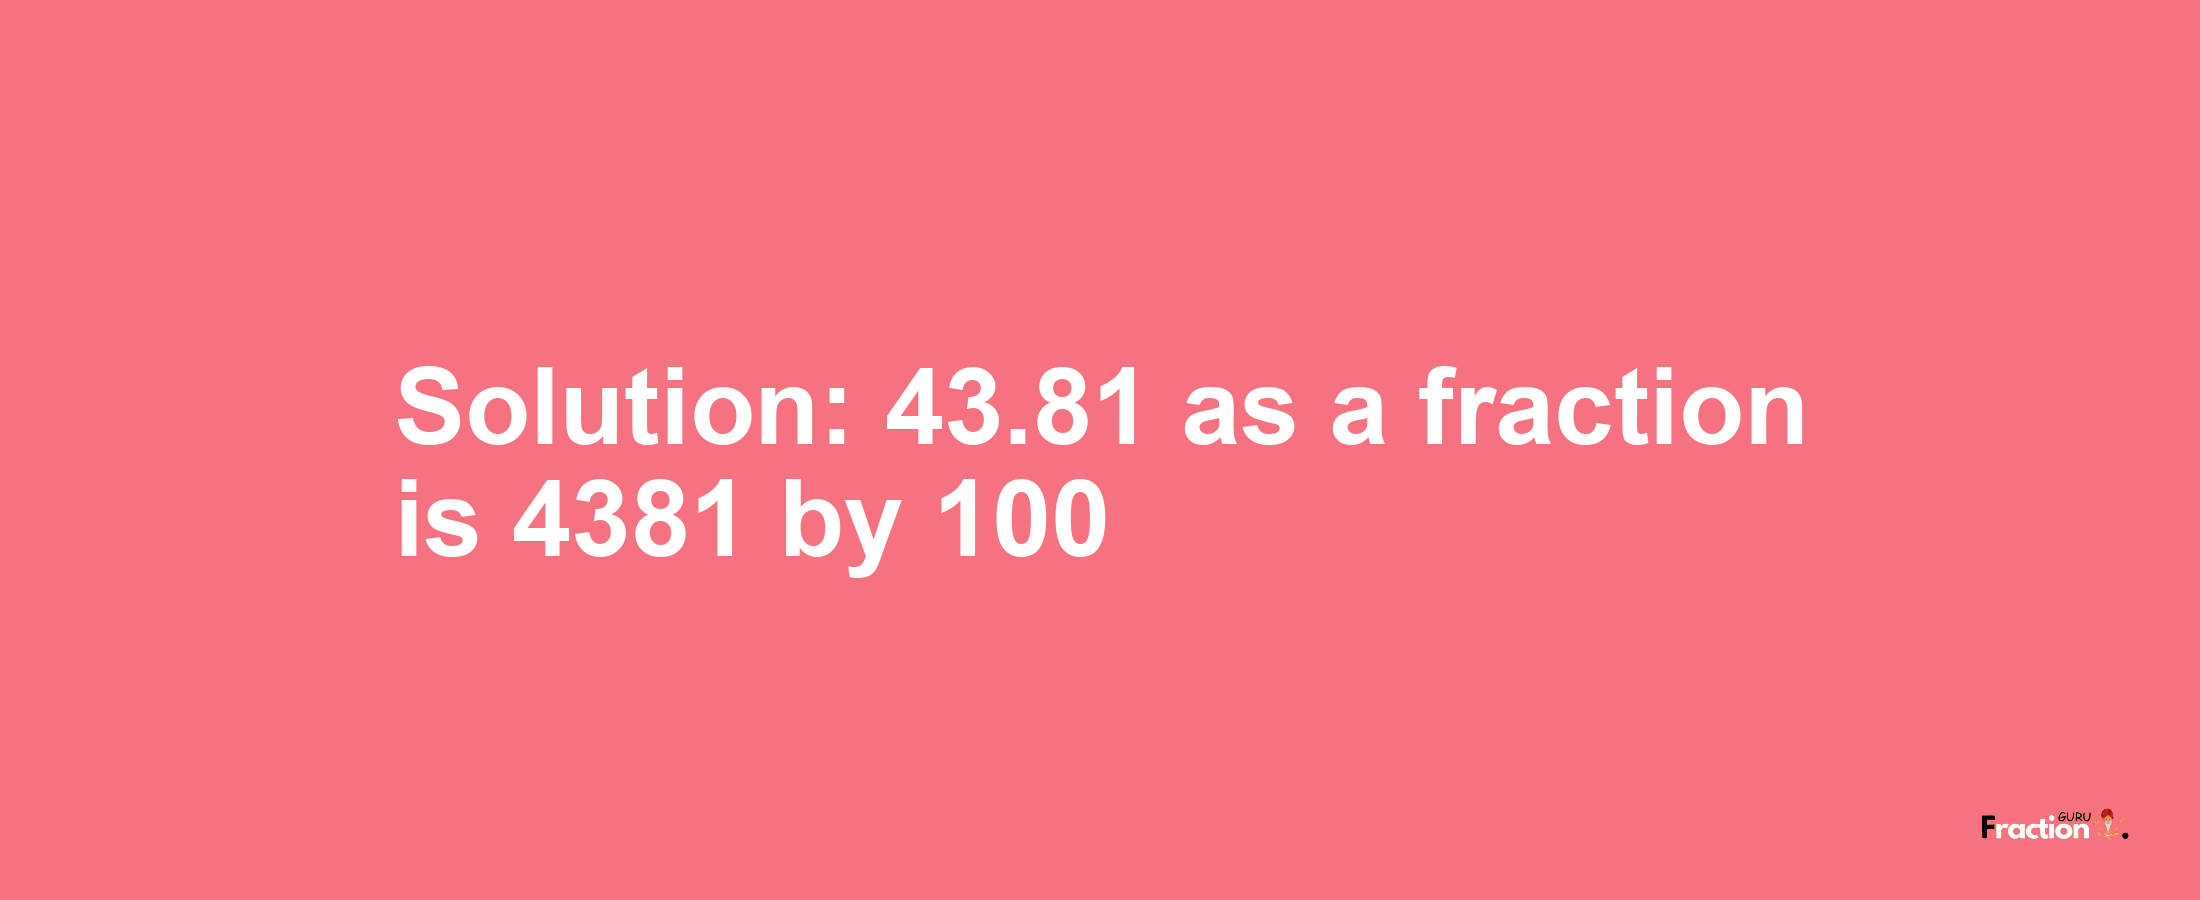 Solution:43.81 as a fraction is 4381/100